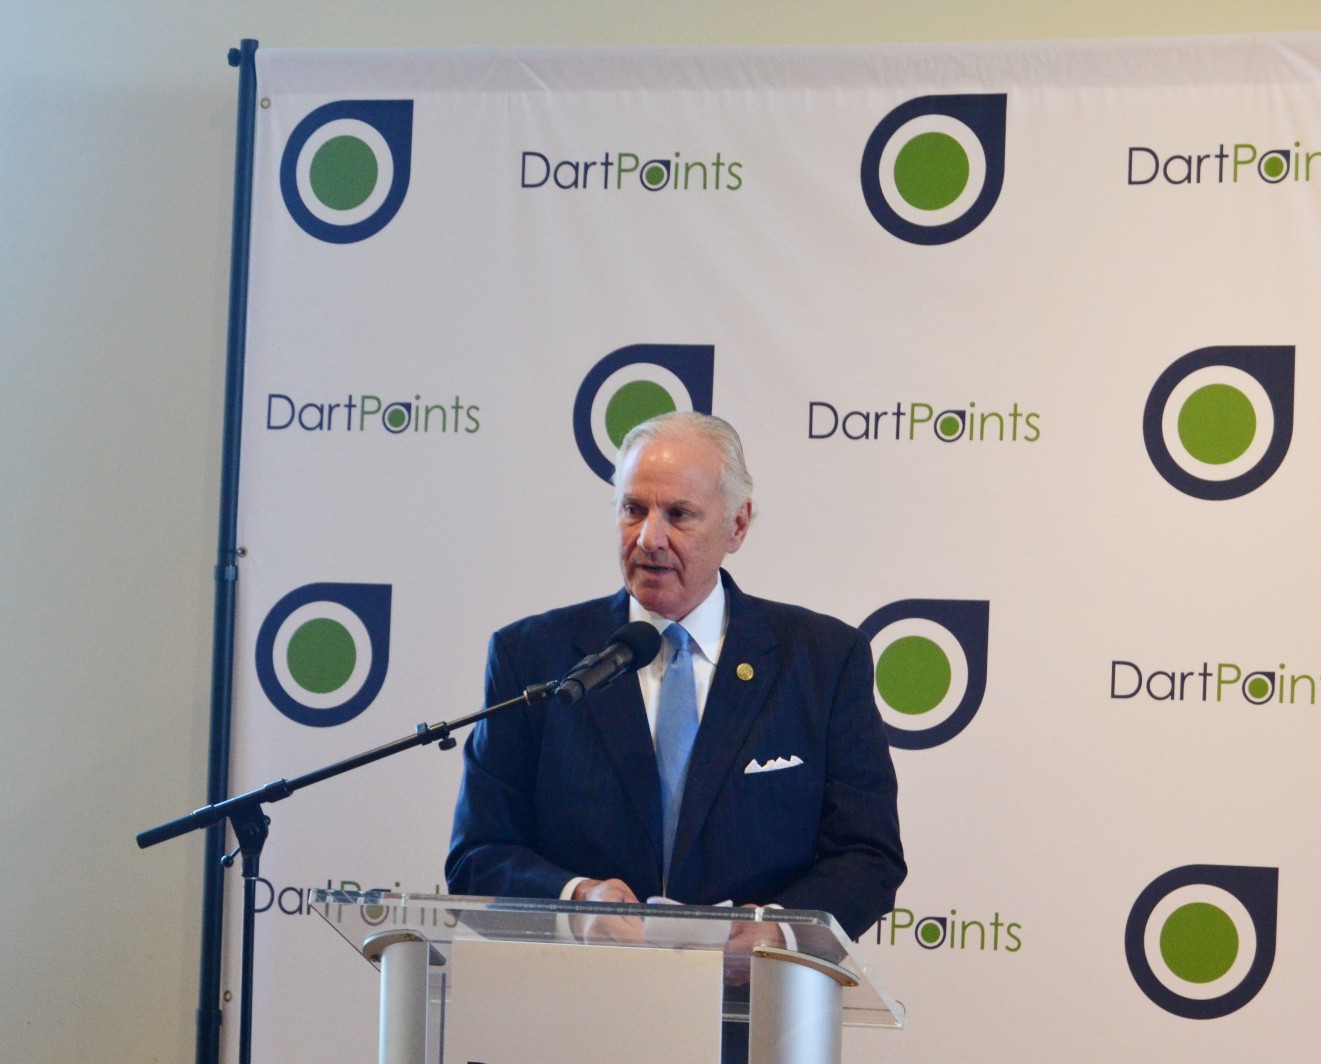 S.C. Gov. Henry McMaster addresses a crowd assembled at 701 Whaley Street on Wednesday to learn details of DartPoints' plans for South Carolina's first internet exchange. (Photo/Melinda Waldrop)